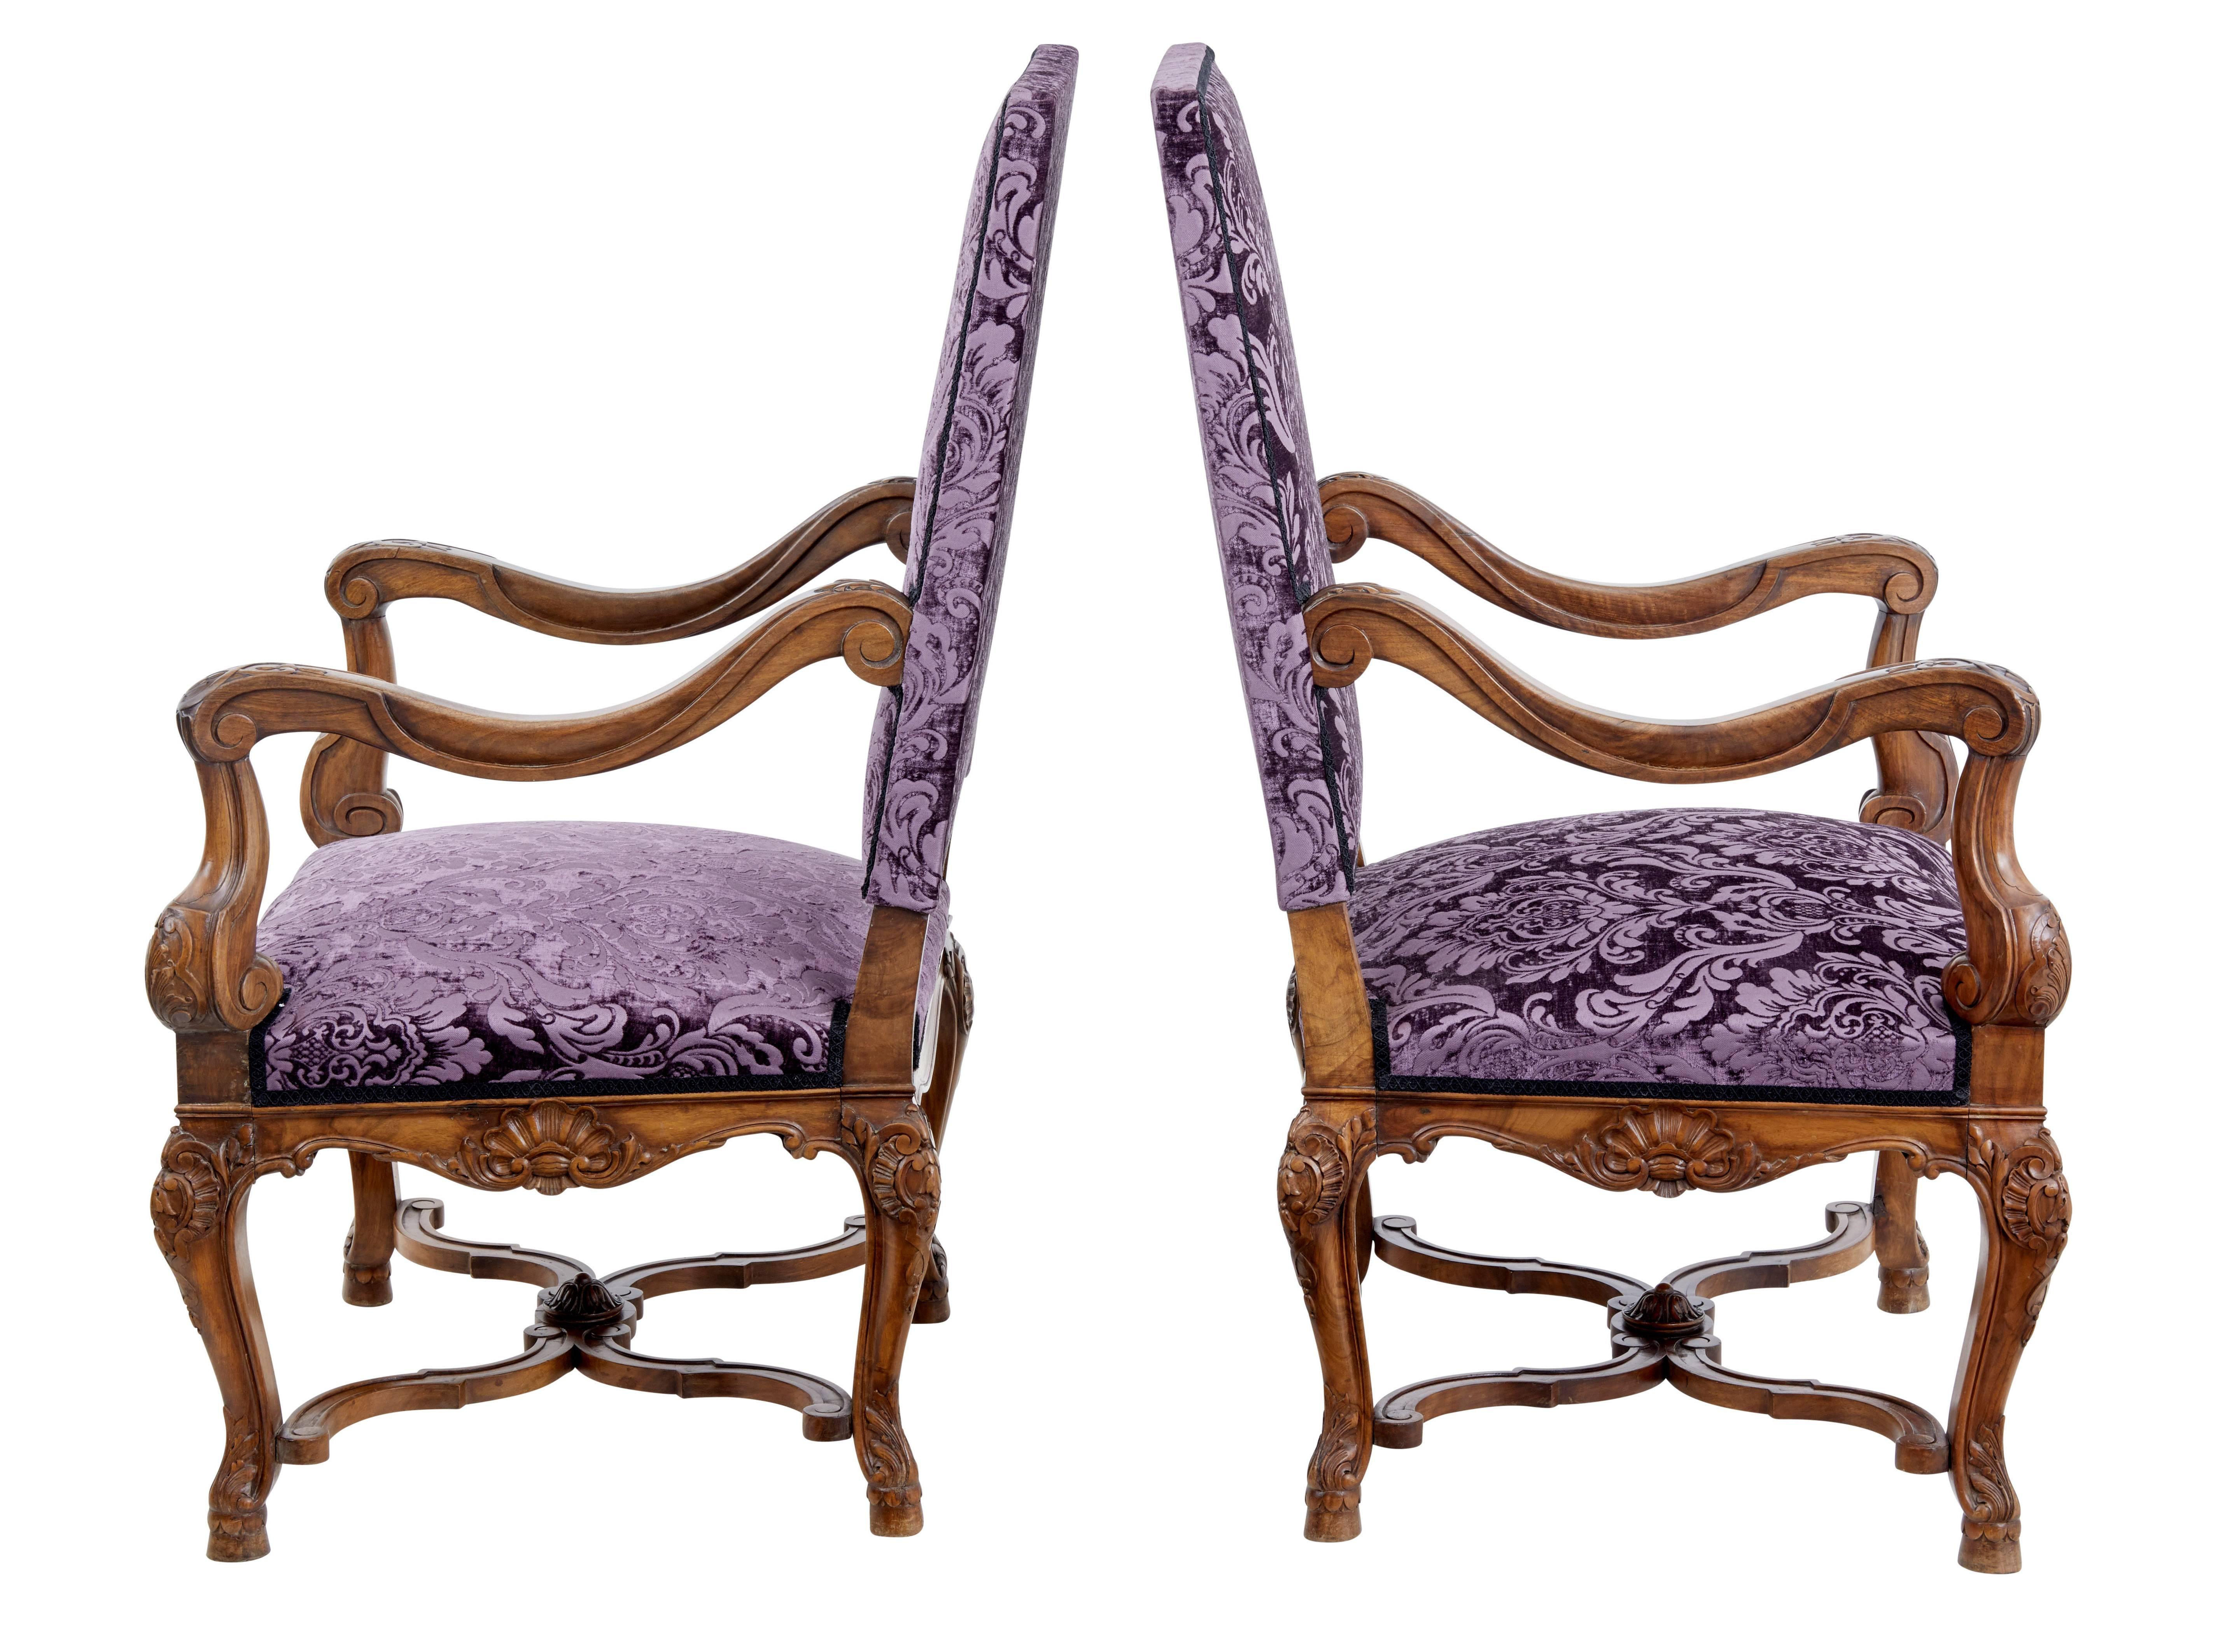 Delightful pair of French walnut armchairs.

With Art Nouveau carving to the arm, which flows all the way down the frame.

Good wide seat provides comfortable proportions.

Velvet flocked fabric is in good usable condition.

Cabriole legs